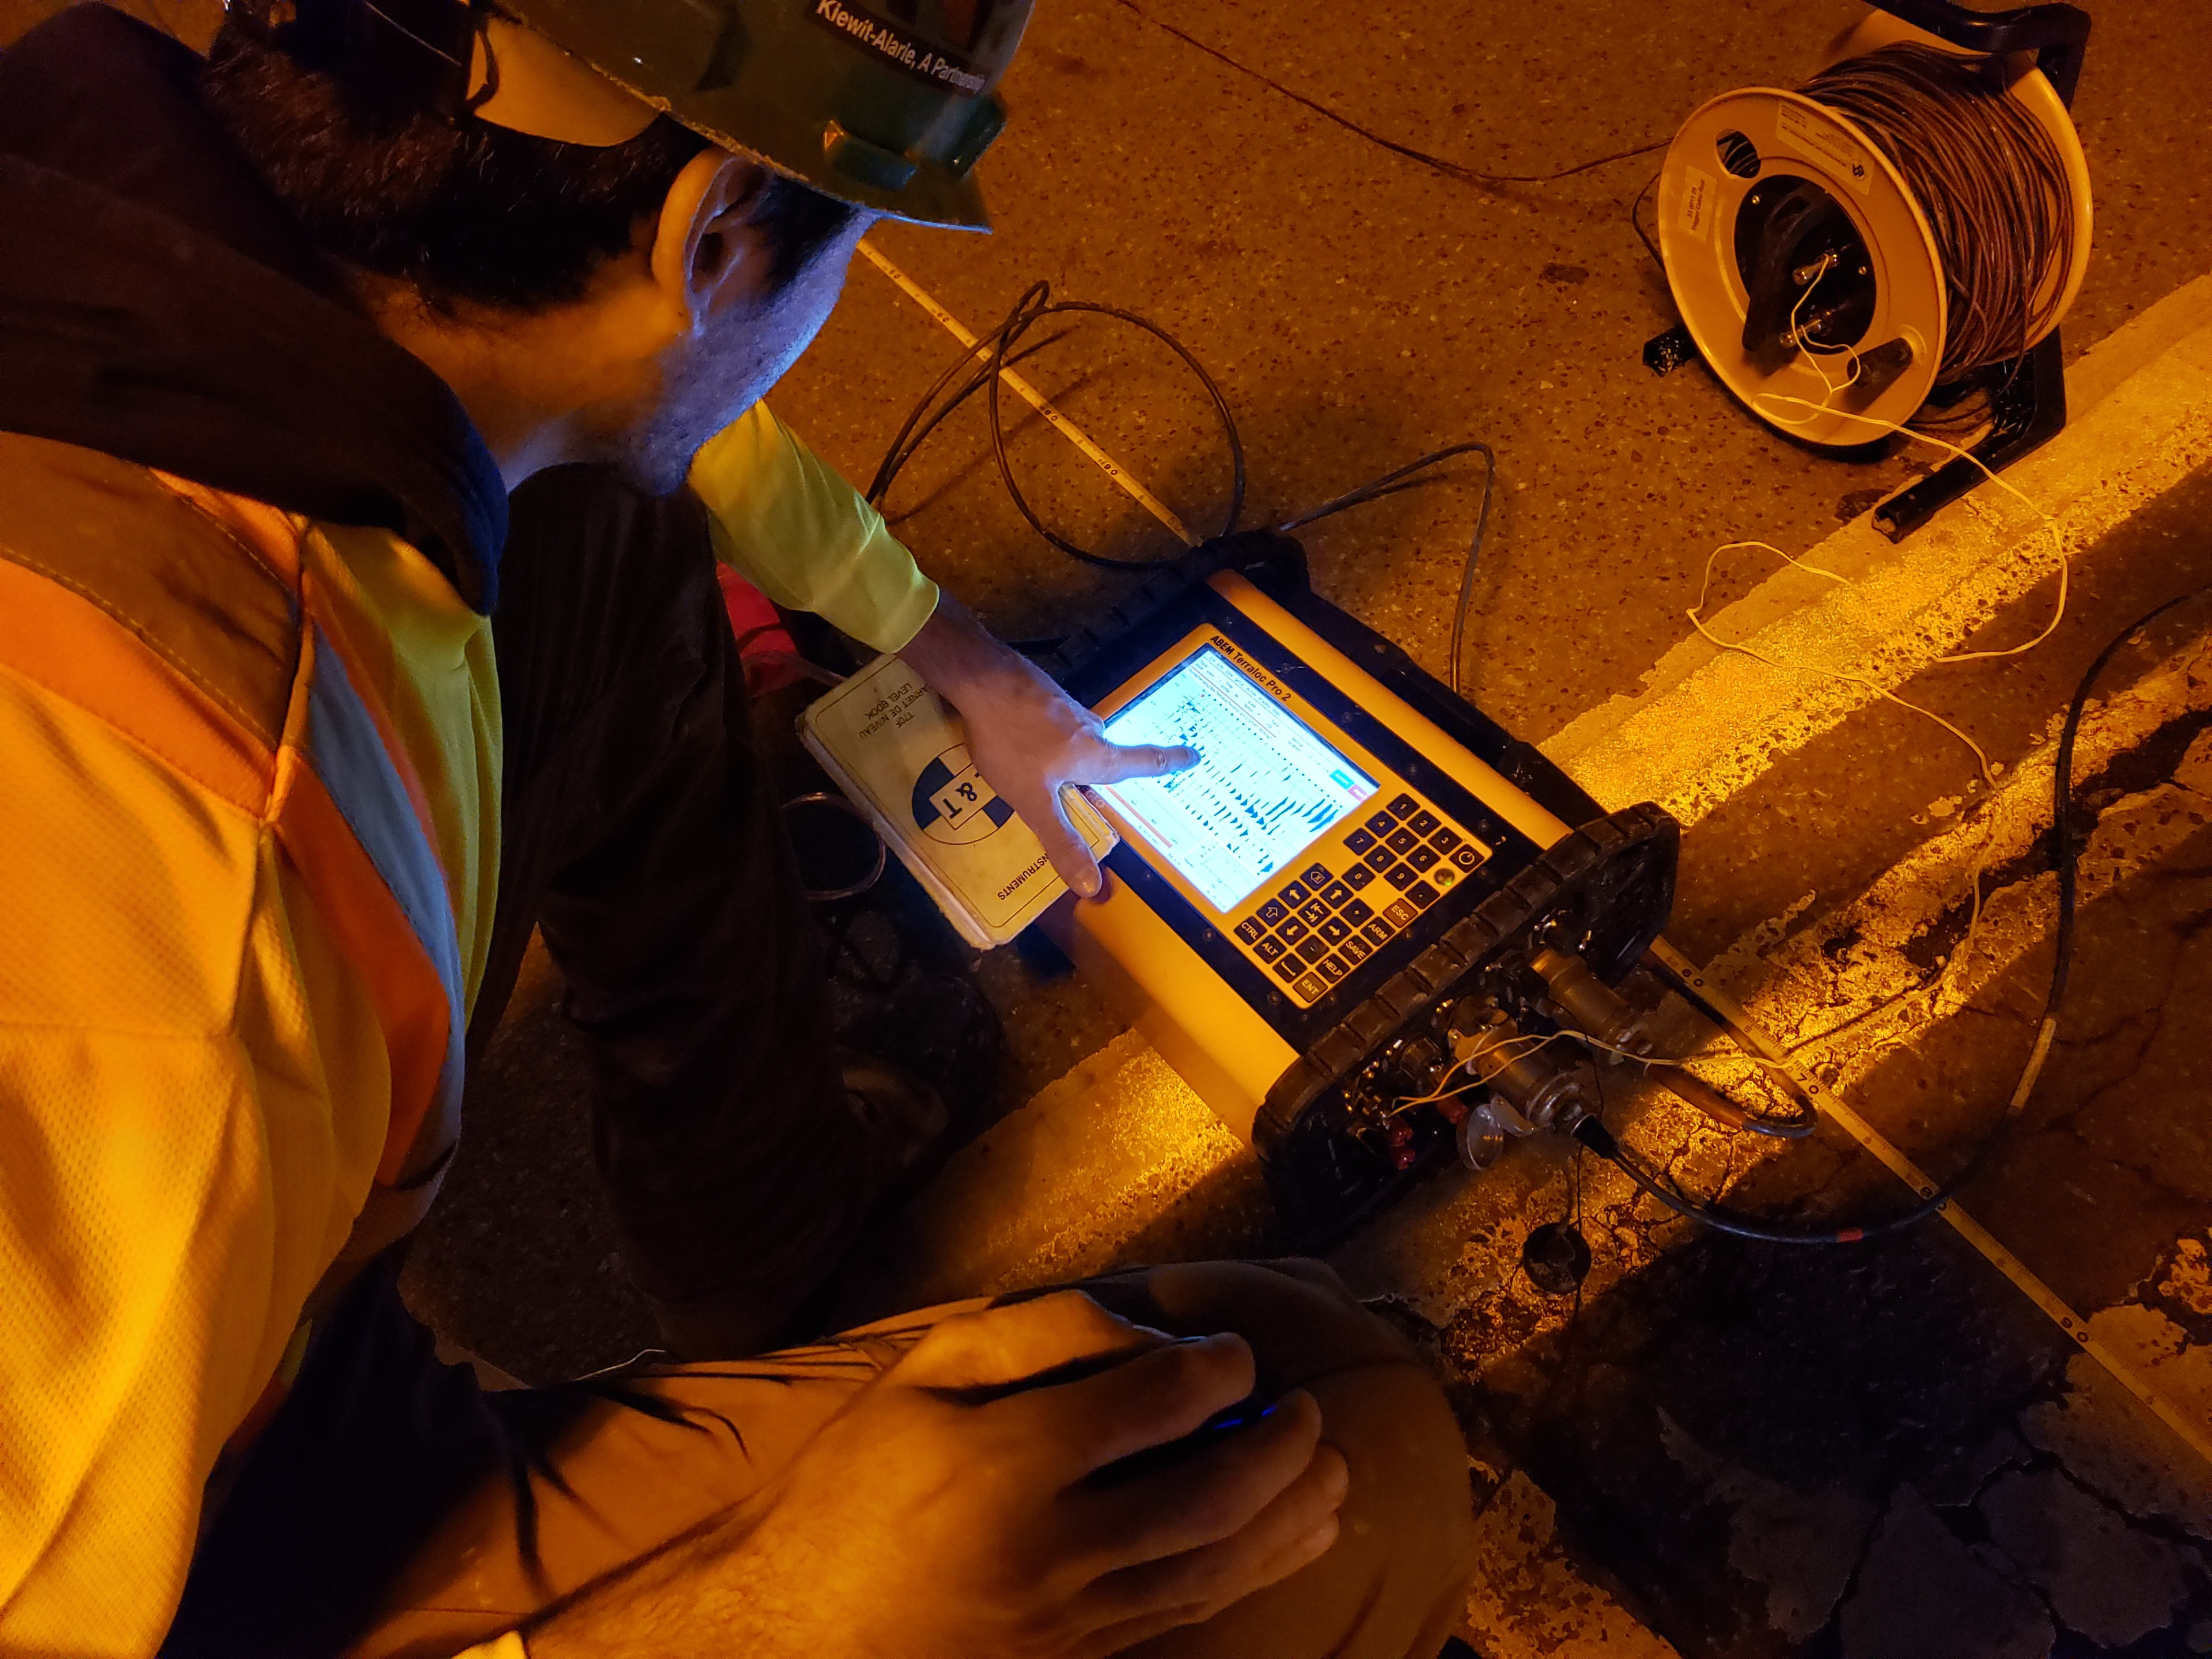 An expert looks at a device used on a street.